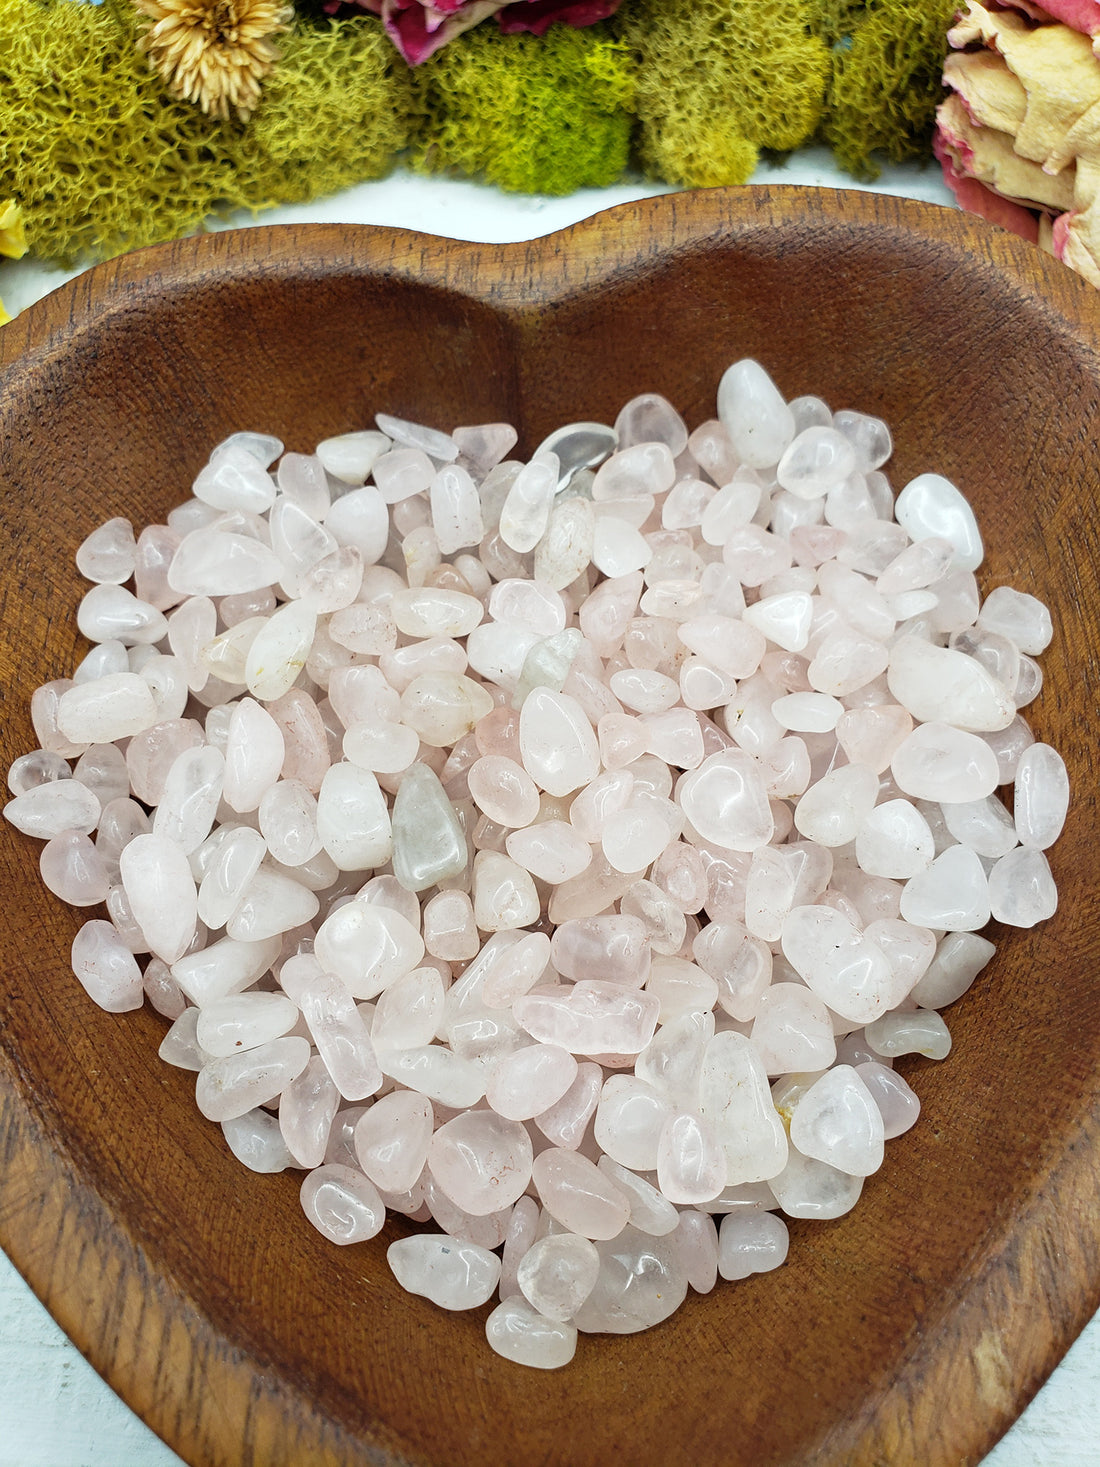 eight ounces of rose quartz stone chips in wooden bowl